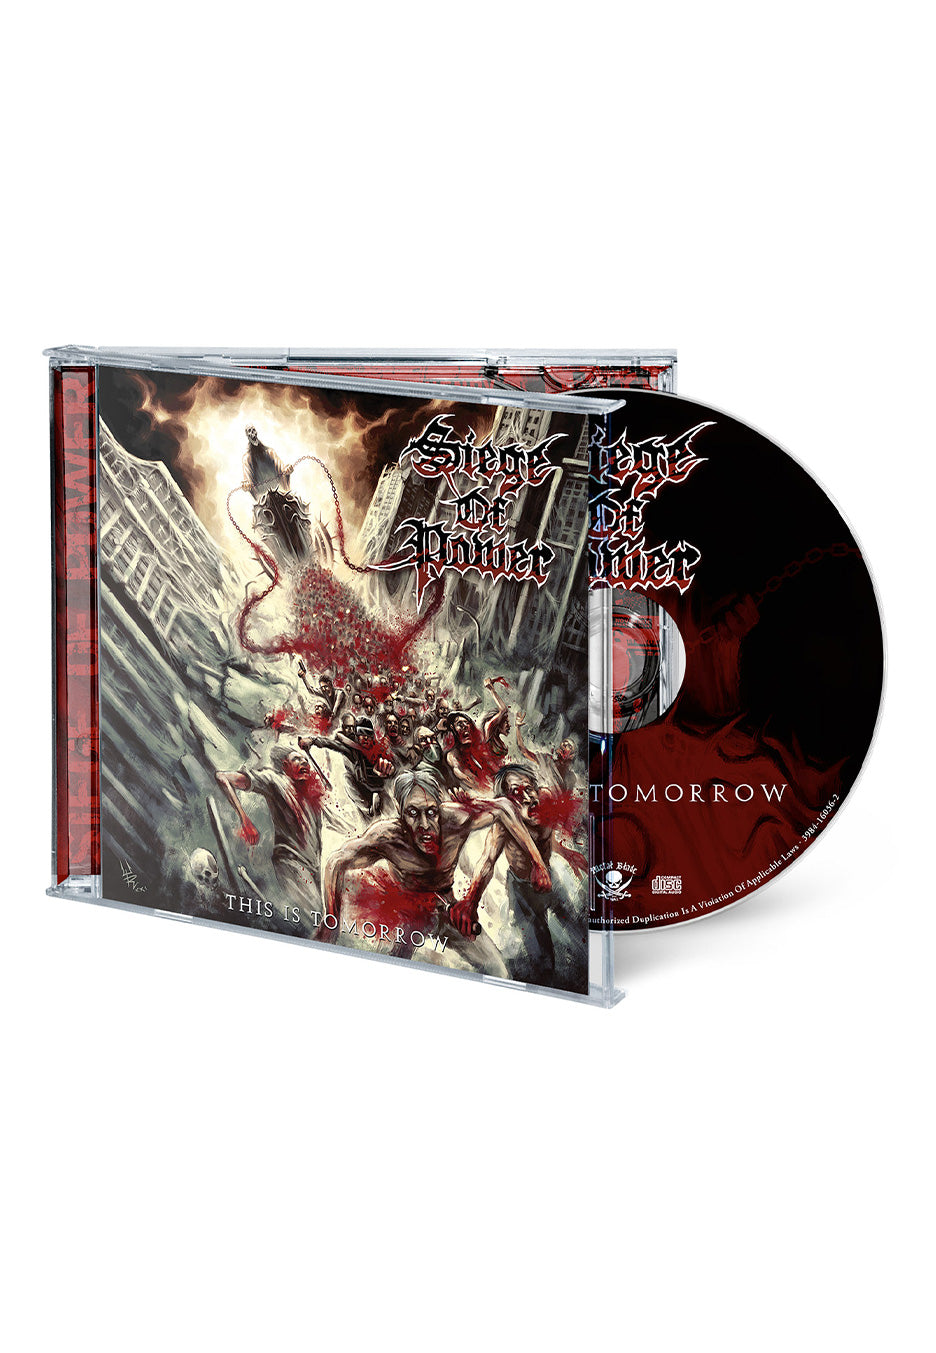 Siege Of Power - This Is Tomorrow - CD